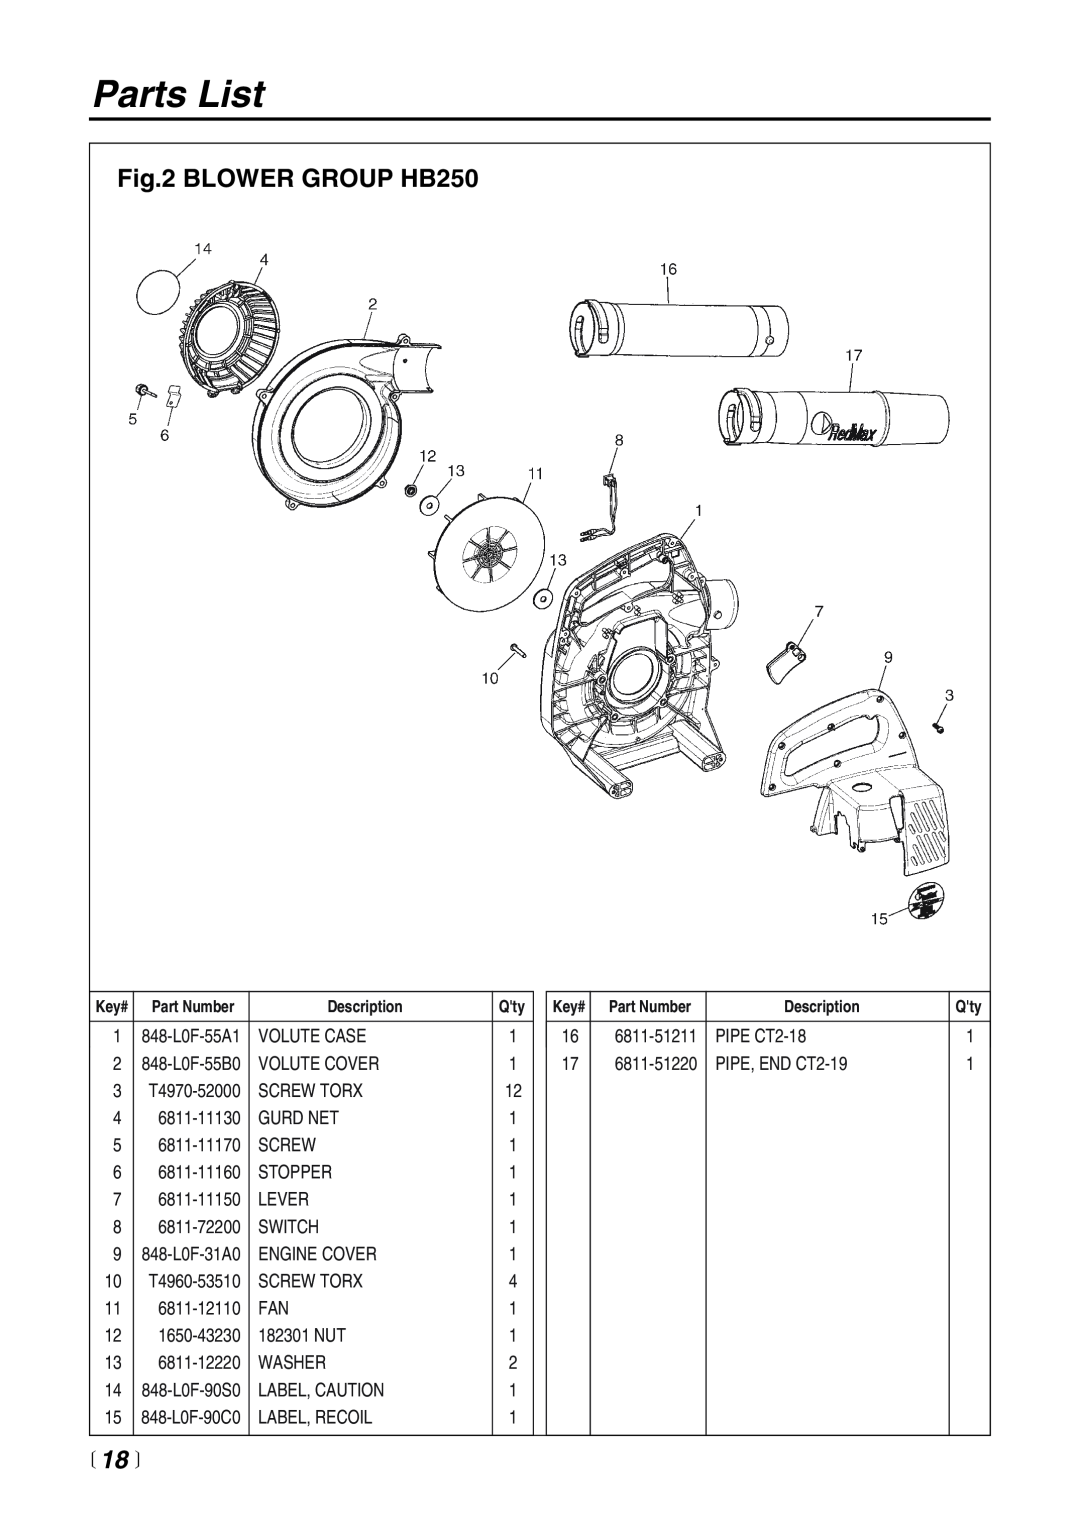 RedMax manual  18 , Parts List, BLOWER GROUP HB250 